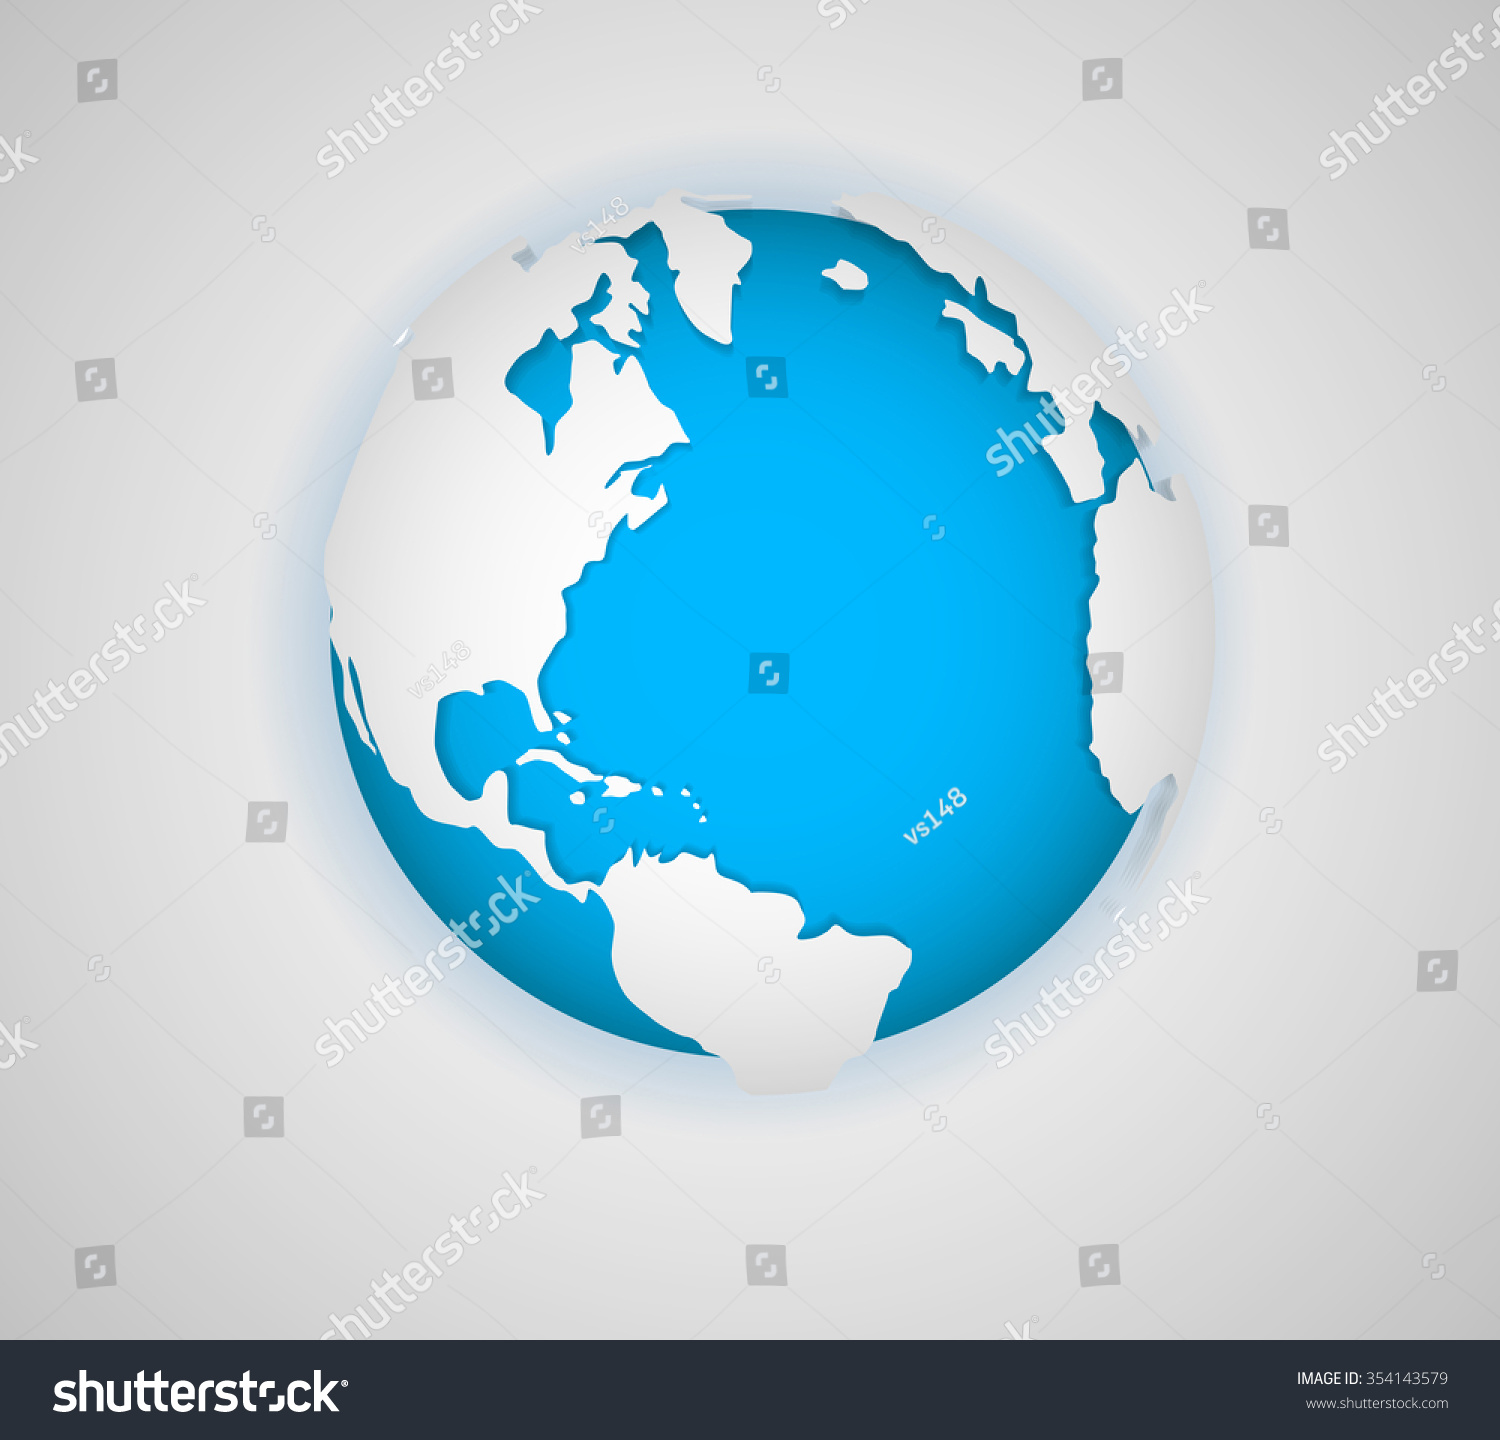 Abstract Globe Background Stock Vector 354143579 - Shutterstock